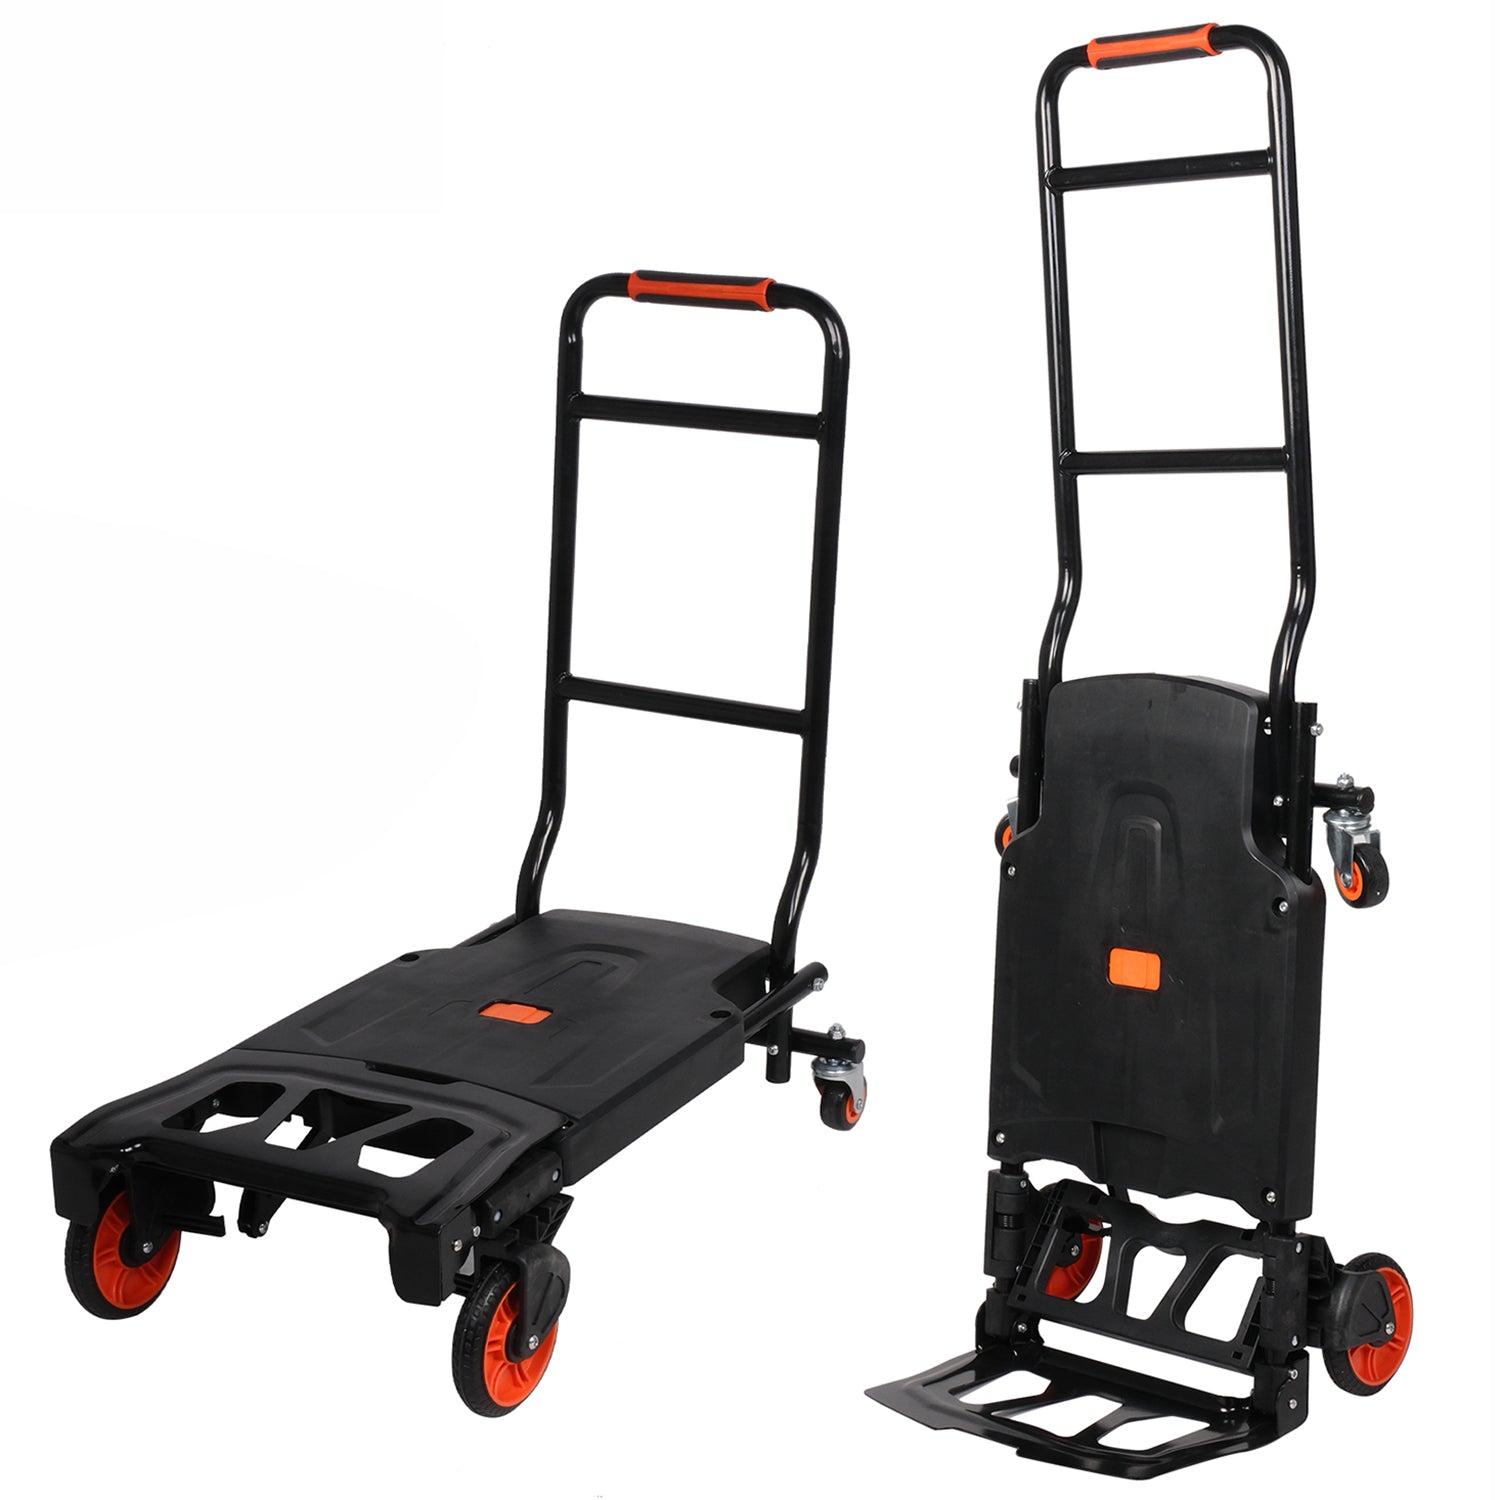 2 in 1 One-Button Folding Hand Truck Folding Portable Flatbed Dolly Cart with Secure Cord, 330lbs Capacity